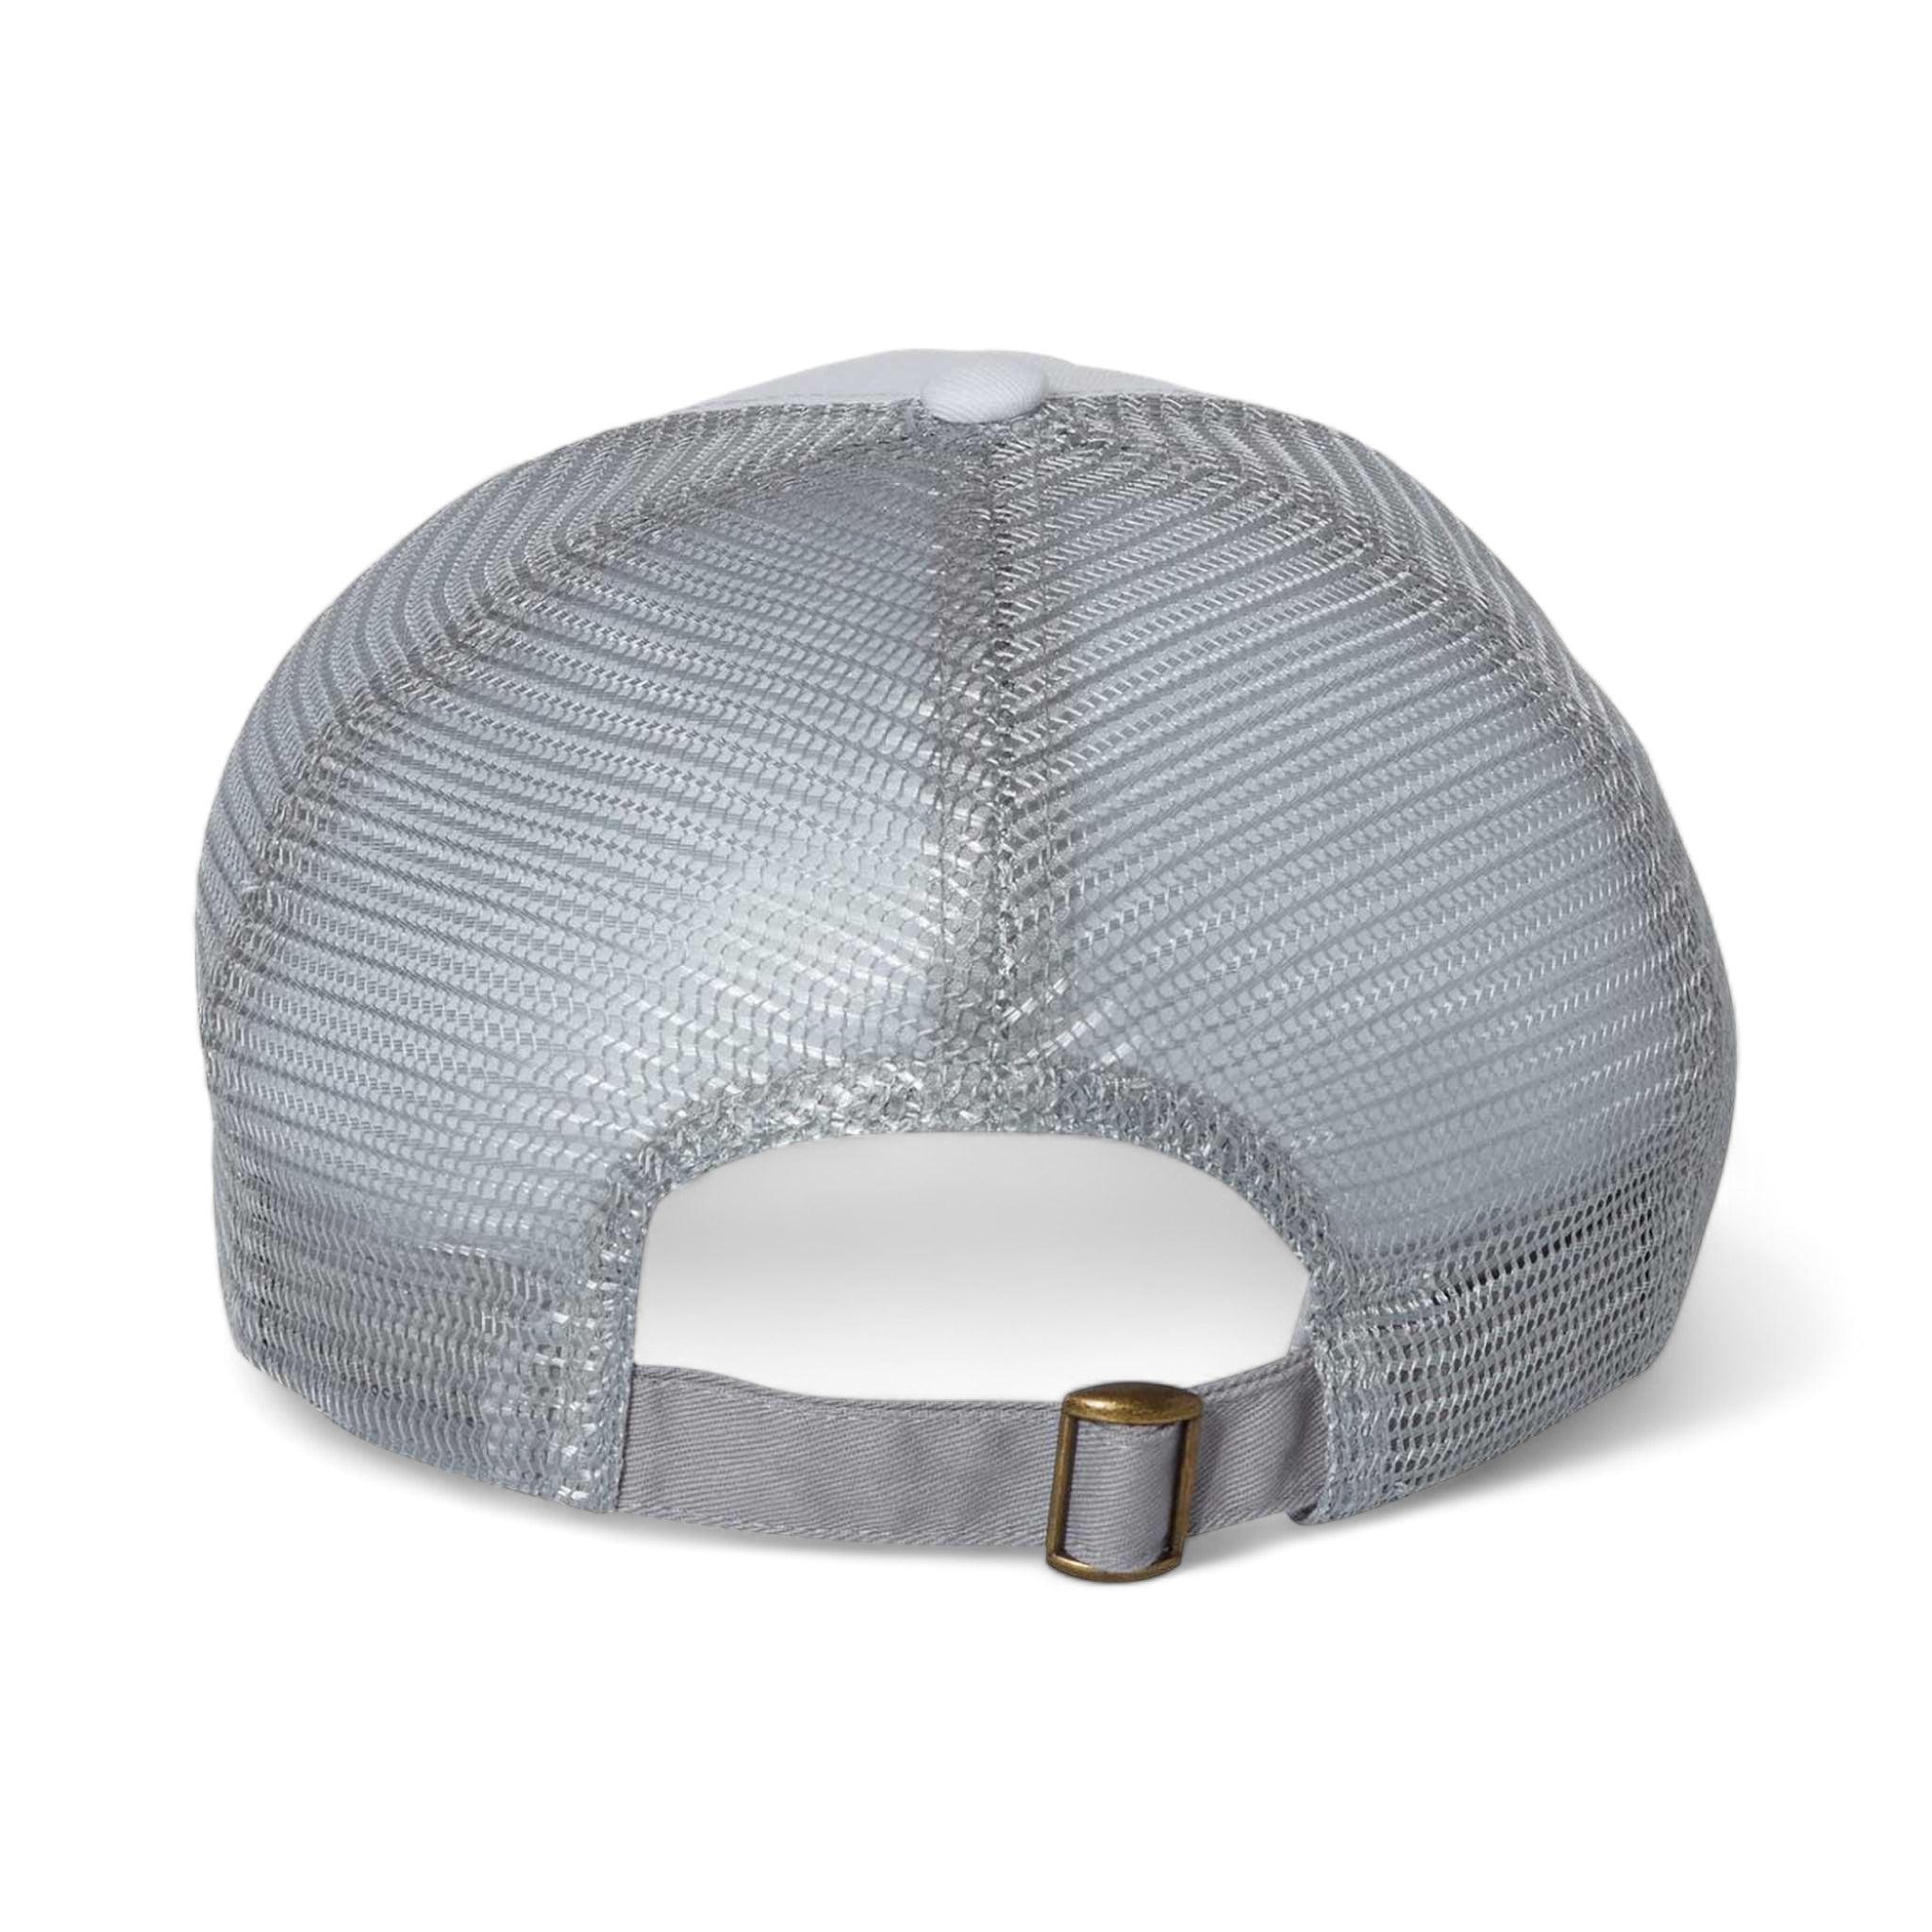 Back view of Sportsman 3100 custom hat in white and grey